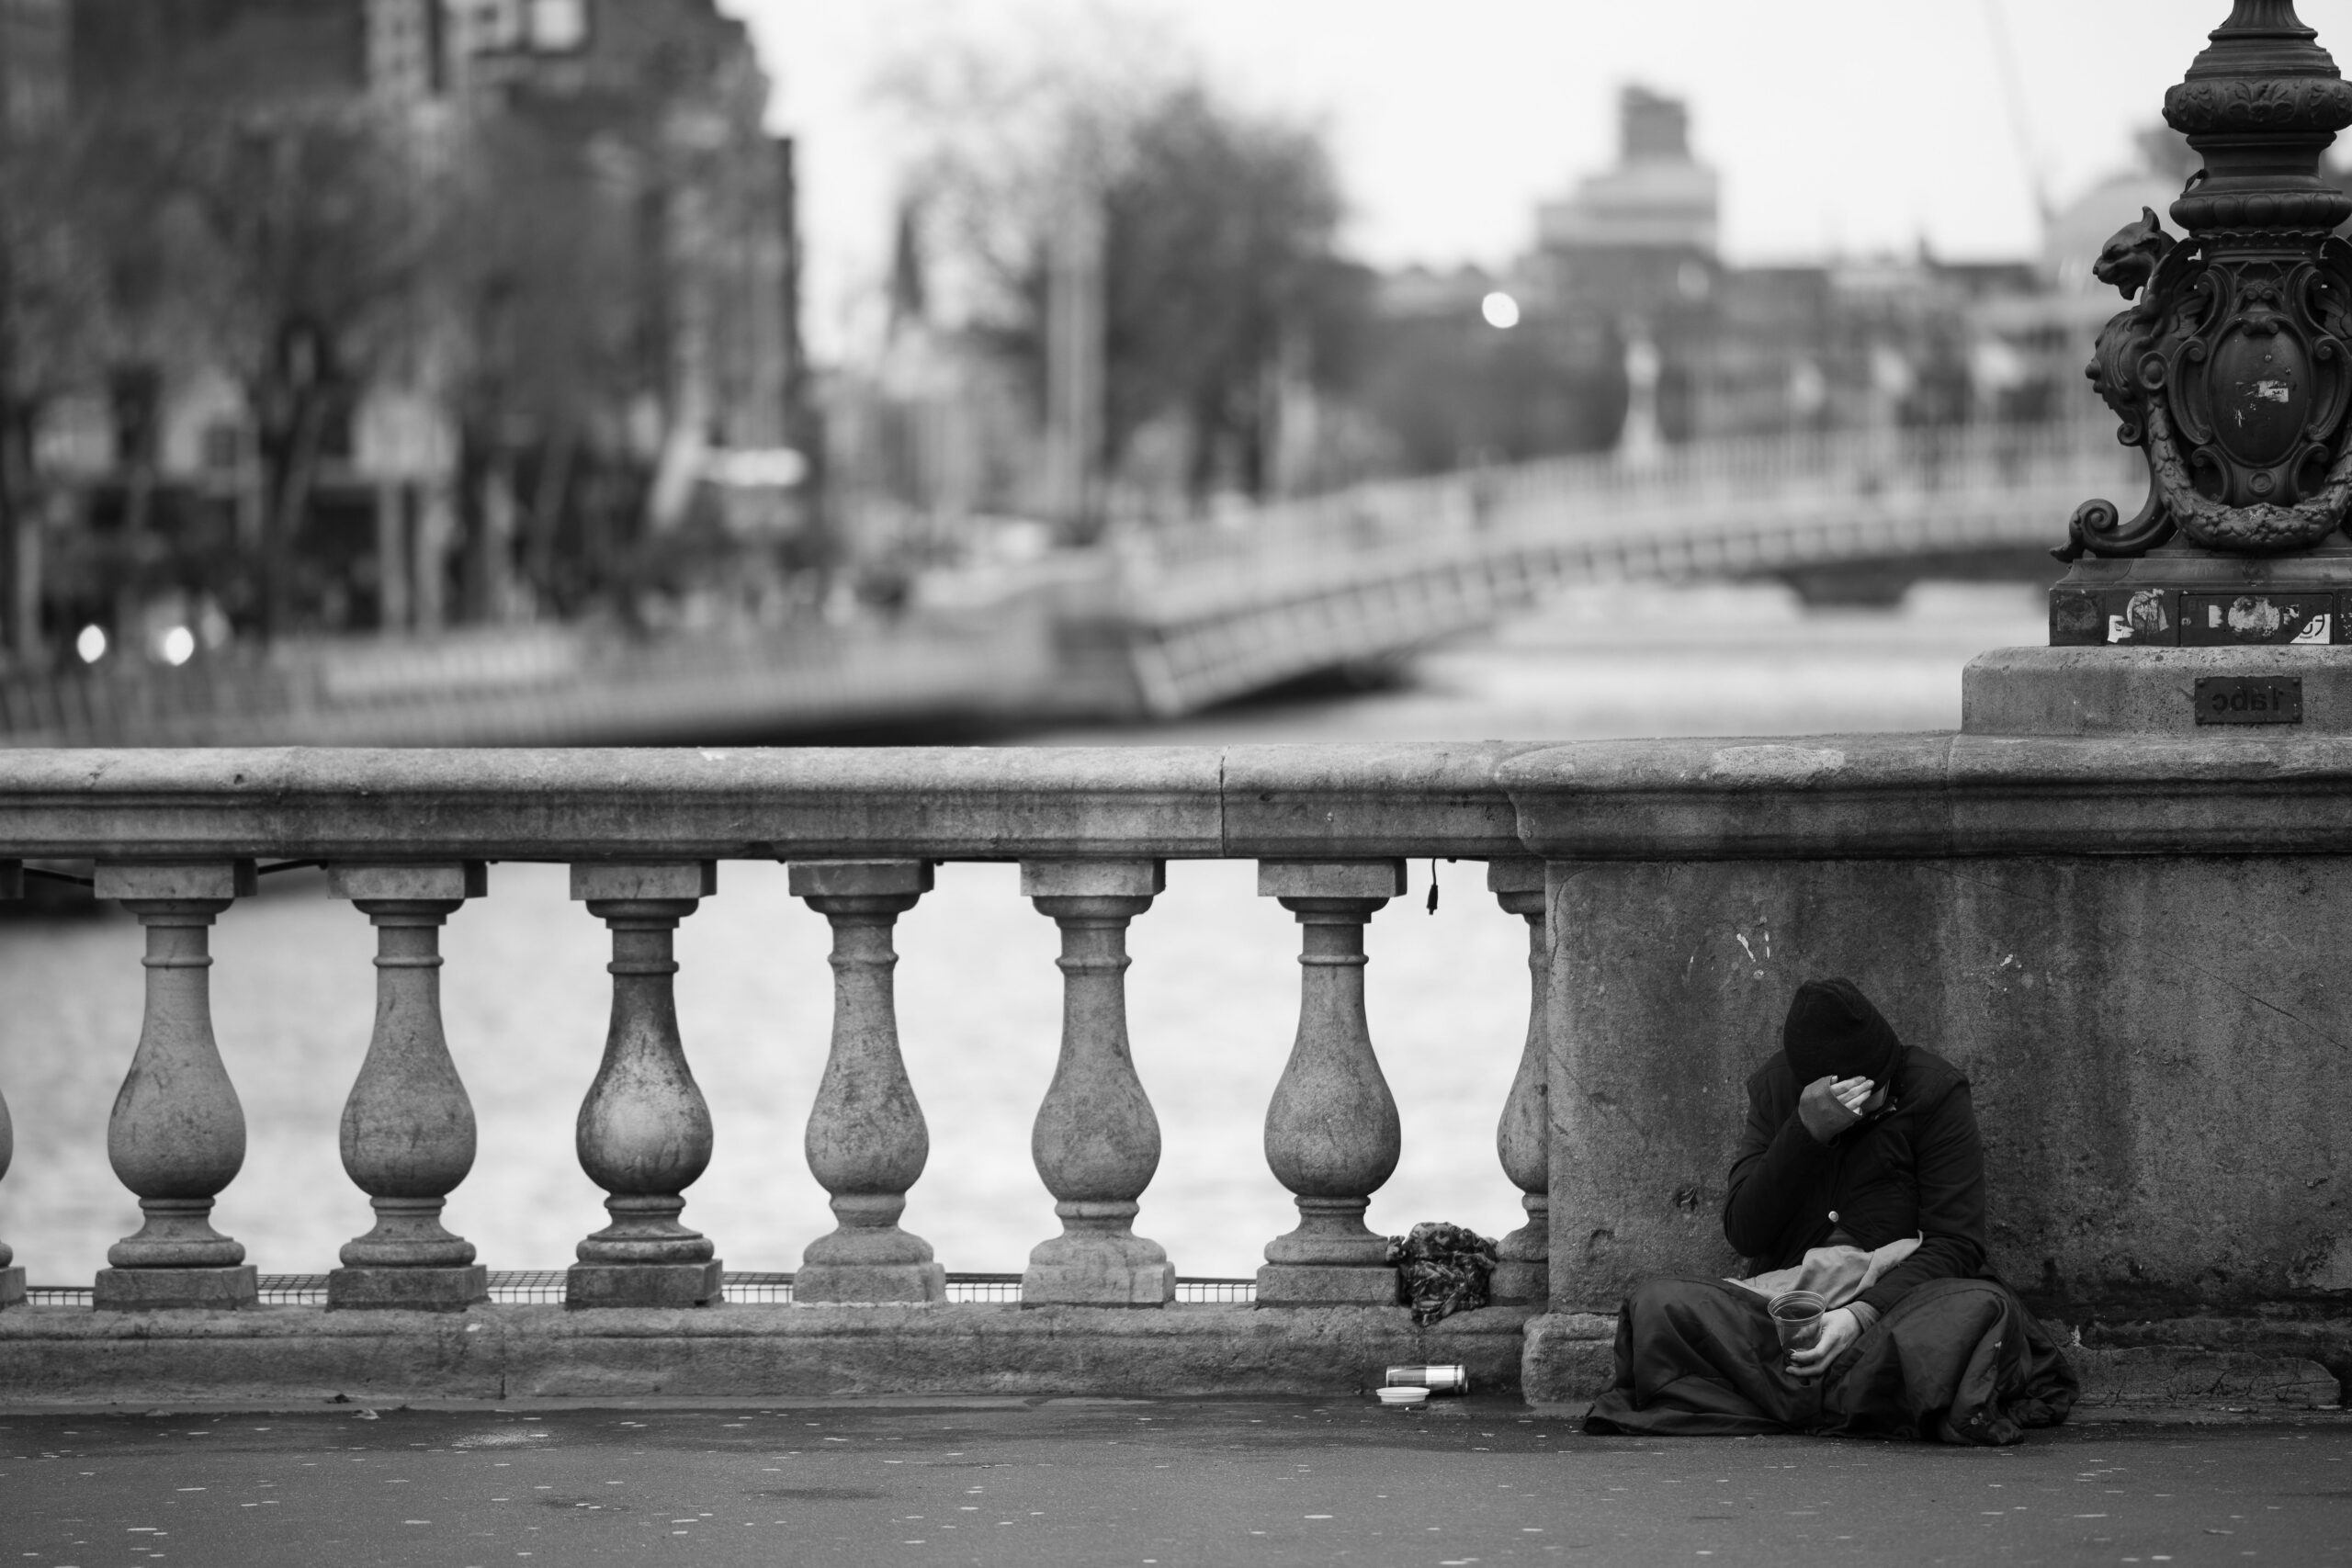 Man on bridge in the cold sitting on the floor